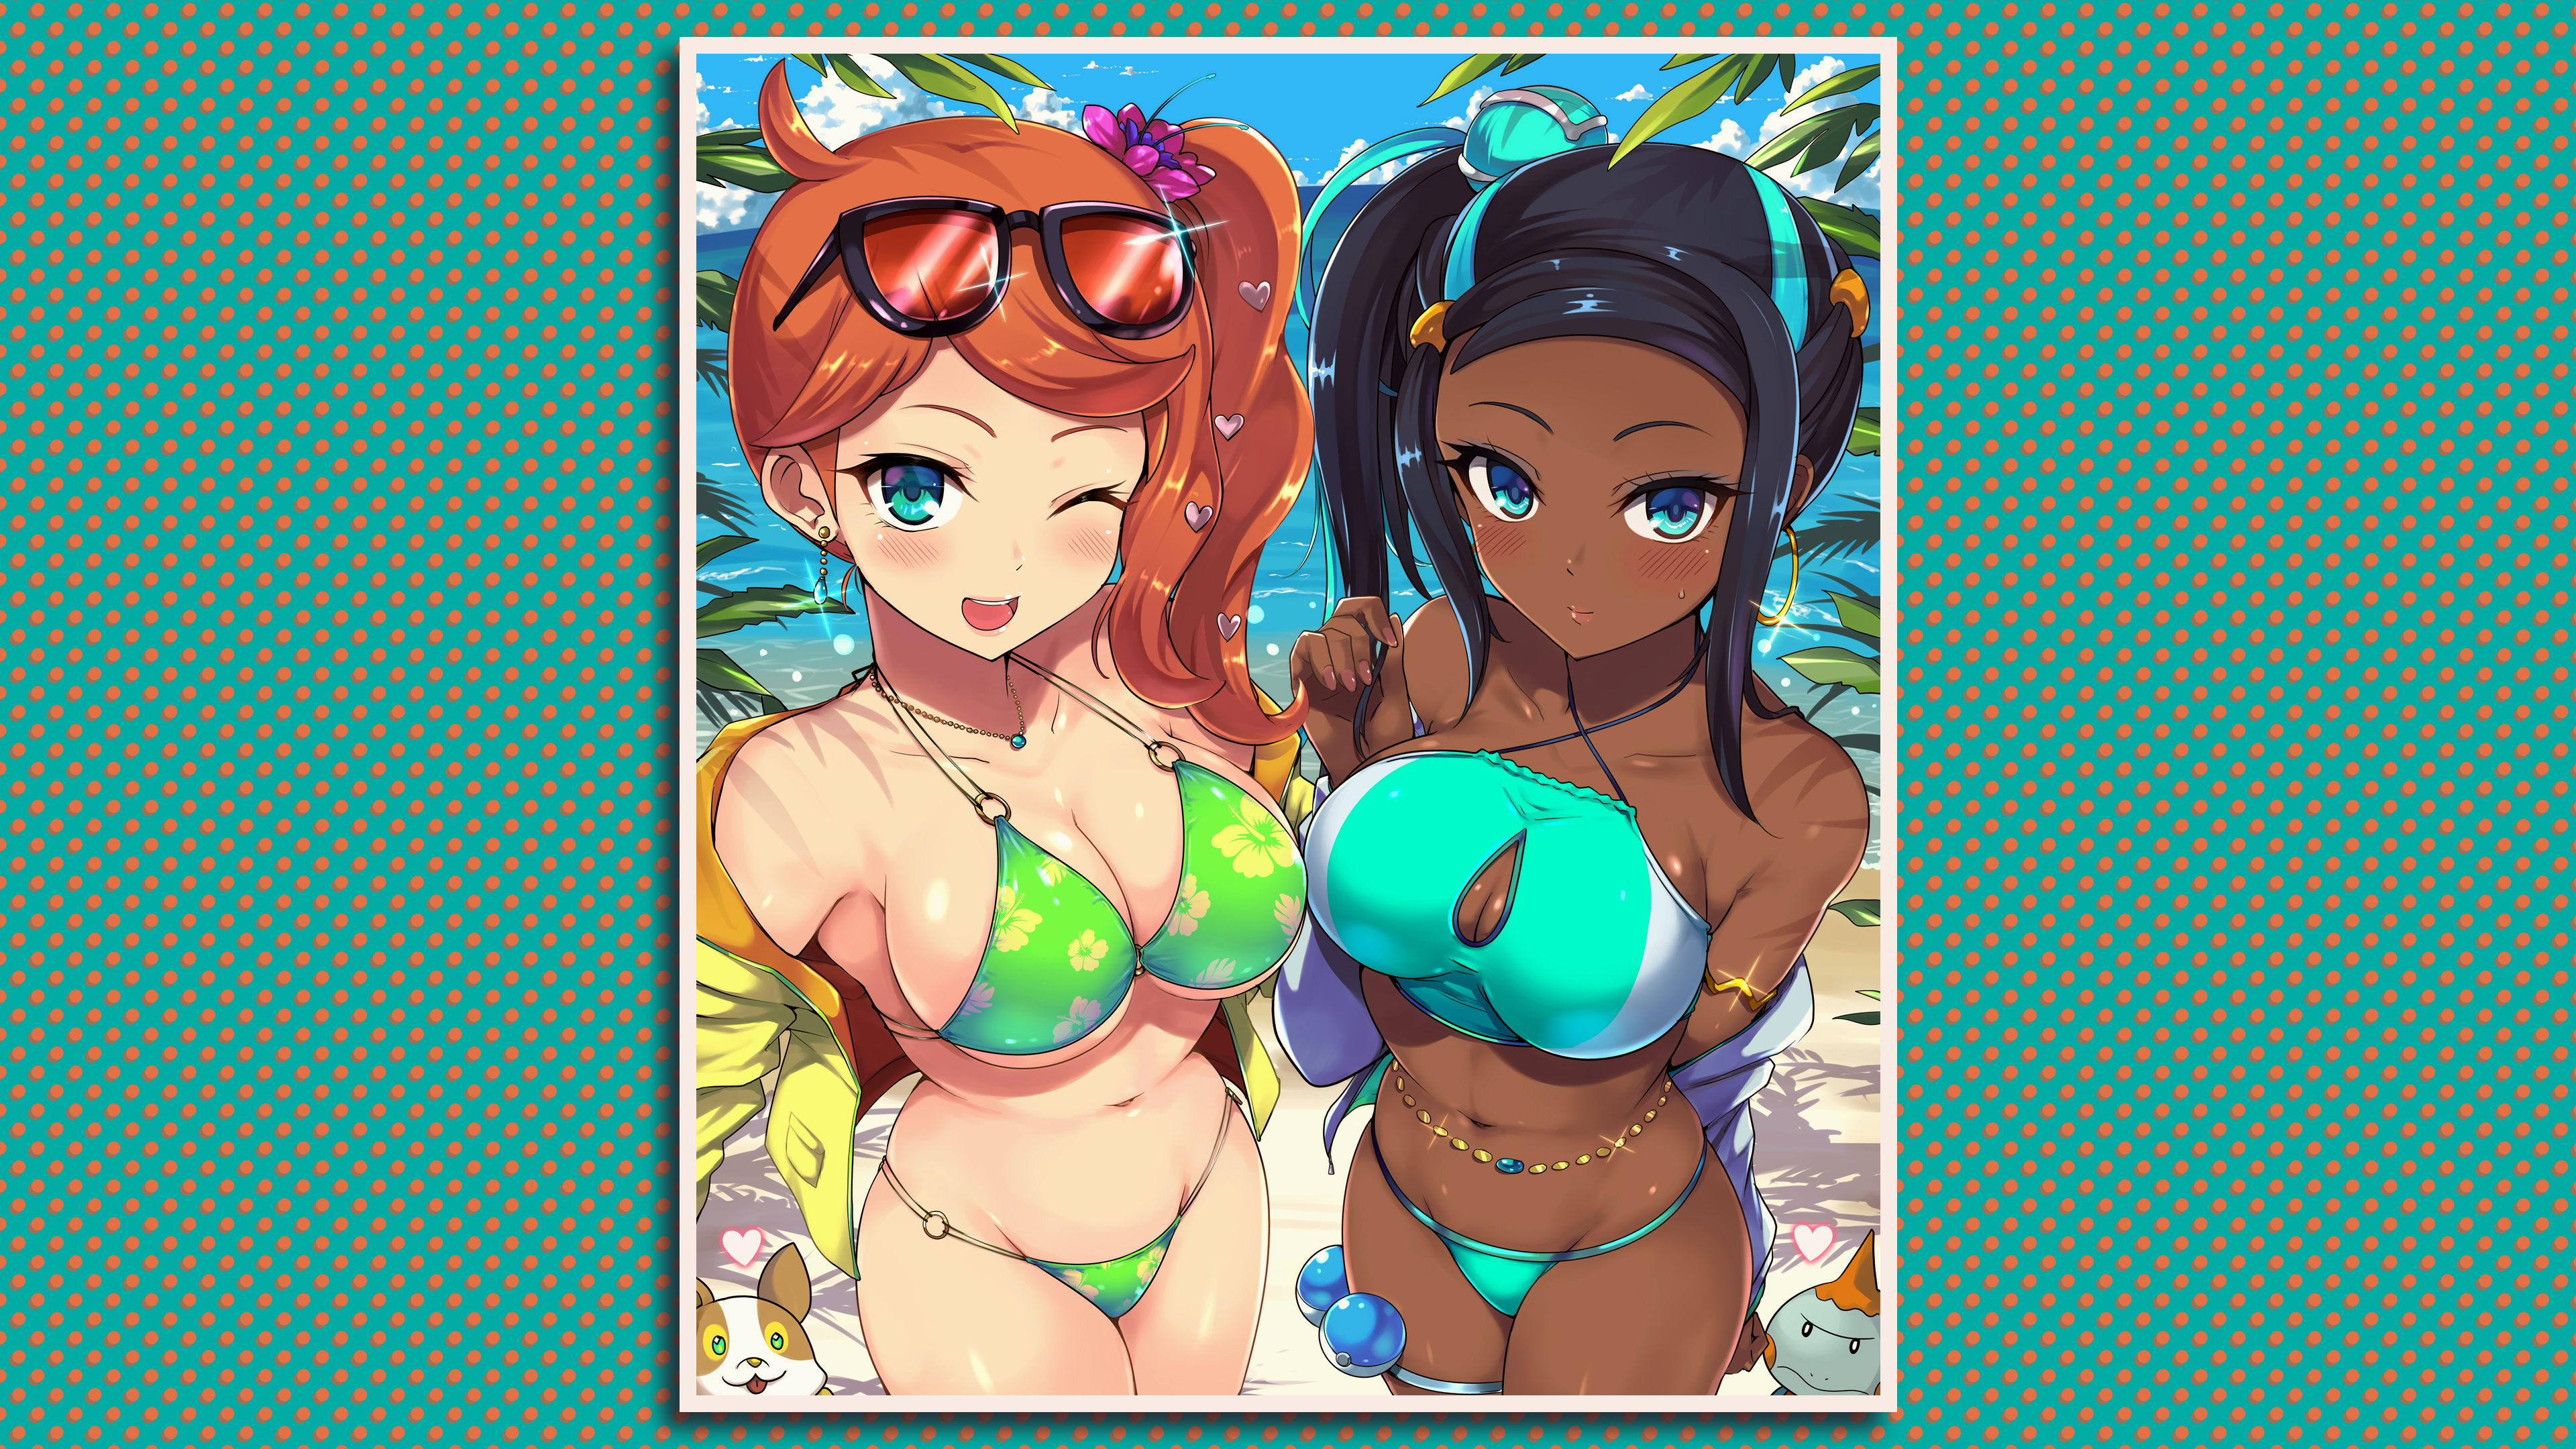 Anime 3840x2160 looking at viewer bikini Pokémon Sword & Shield Nessa (Pokémon Sword and Shield) Sonia (Pokémon Sword & Shield) glasses women with glasses green bikini blue bikini bikini bottoms bikini top ponytail Side ponytail blue eyes dark skin pale boobs belly belly chains belly button jewelry Nintendo wink cleavage bare shoulders jacket yellow jacket necklace blushing hair ornament flower in hair beach sunglasses dog O ring swimsuit swimwear sand water sea palm trees earring hoop earrings thighs thighs together redhead long hair bangs straps bra straps cleavage cutout undressing Poke Ball Pokémon big boobs one eye closed Kasai Shin open mouth edit simple background standing women on beach